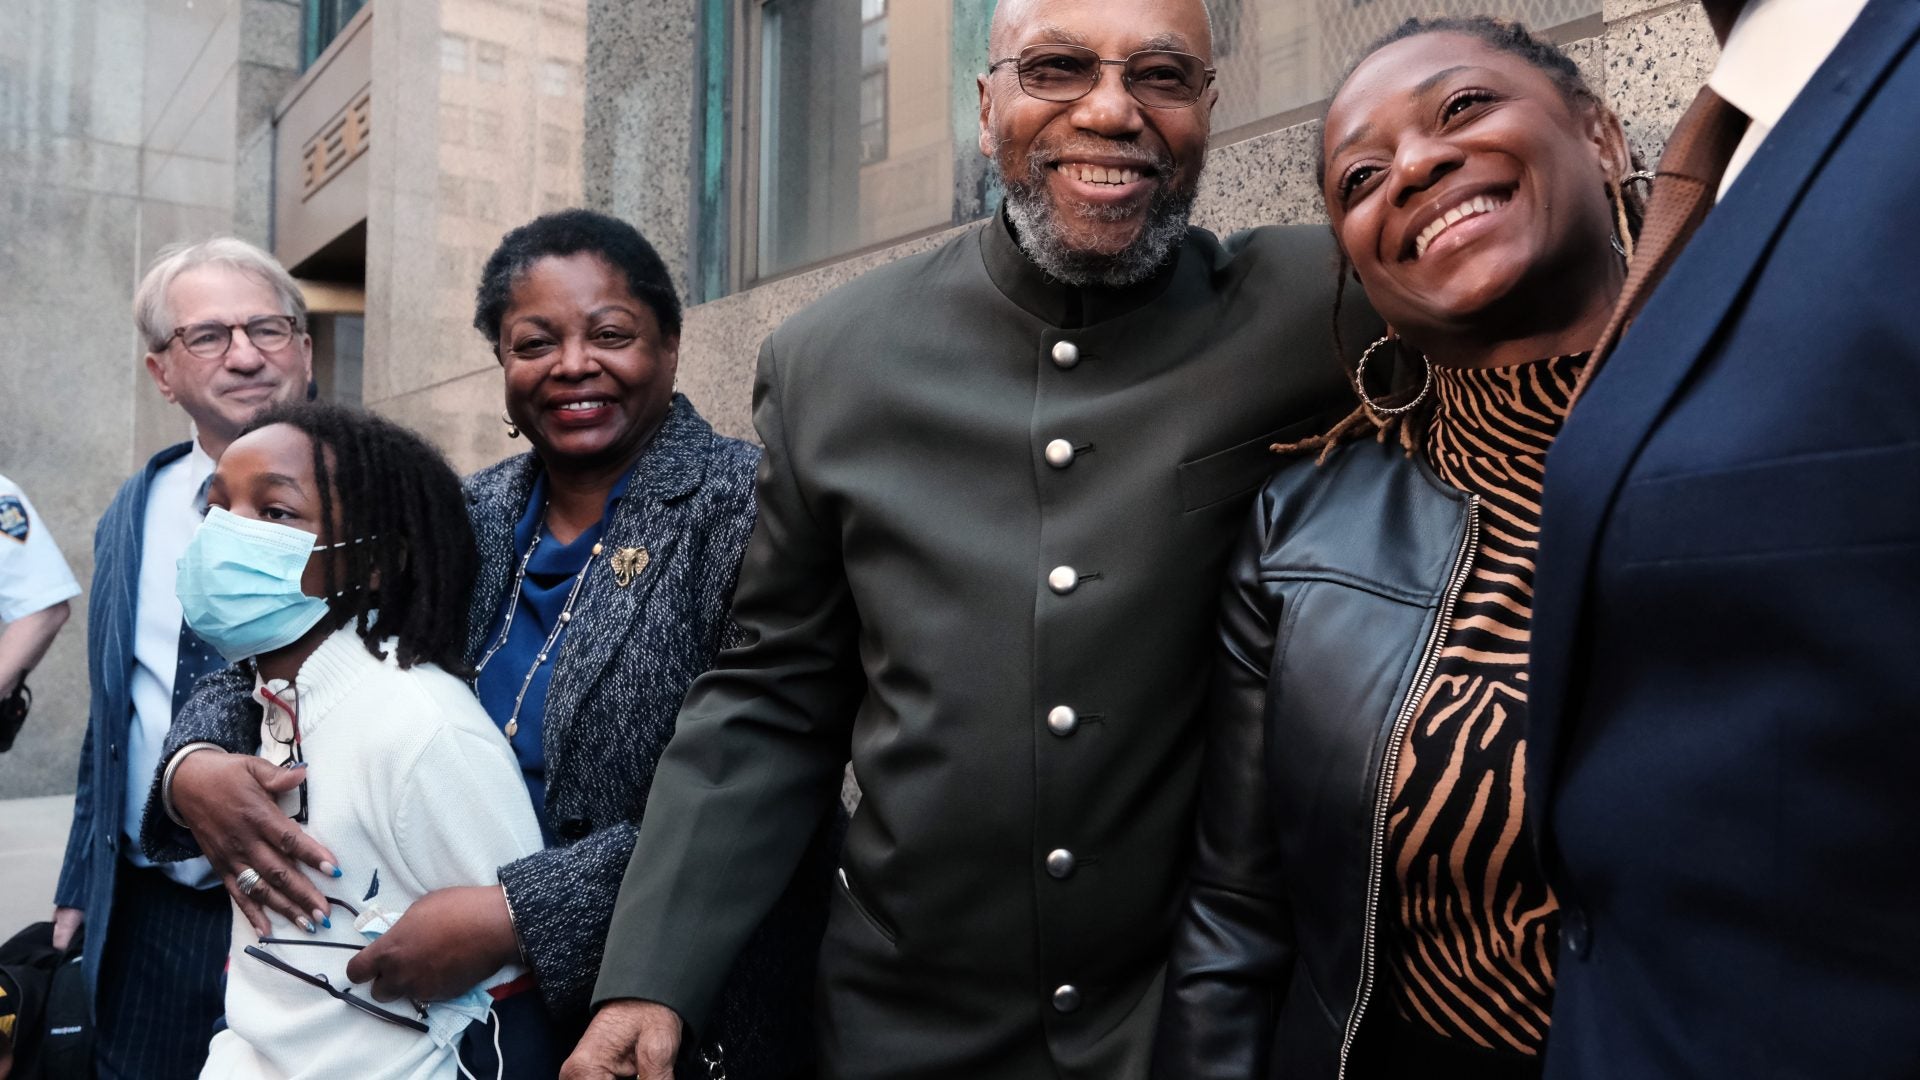 NYC To Pay $26 Million To Two Men Wrongly Convicted Of Killing Malcolm X